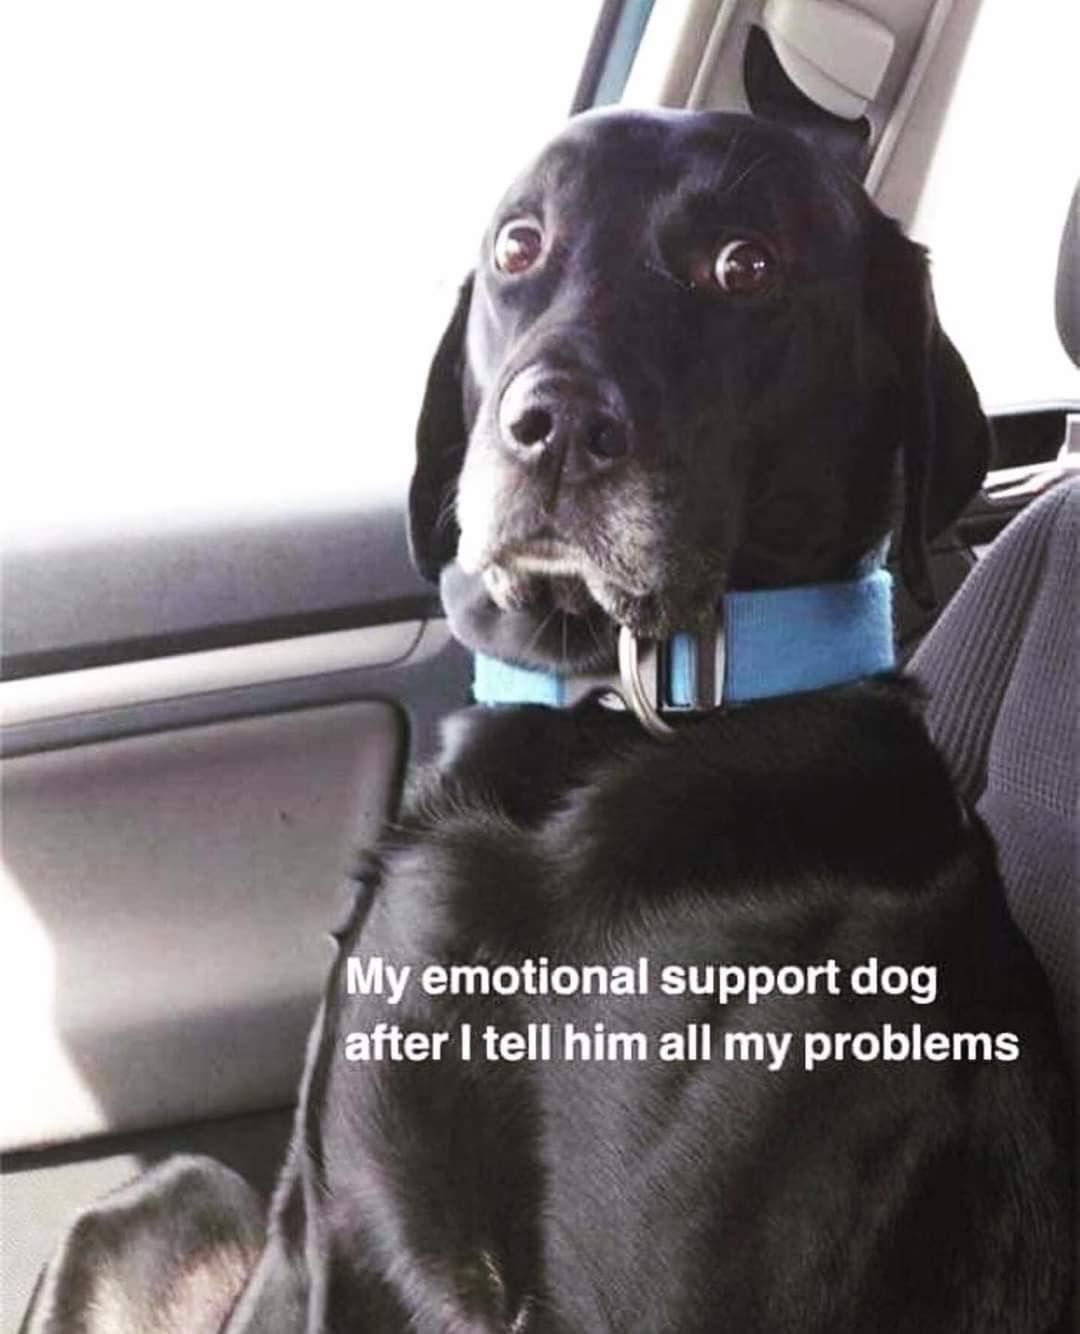 My emotional support dog after I tell him all my problems.